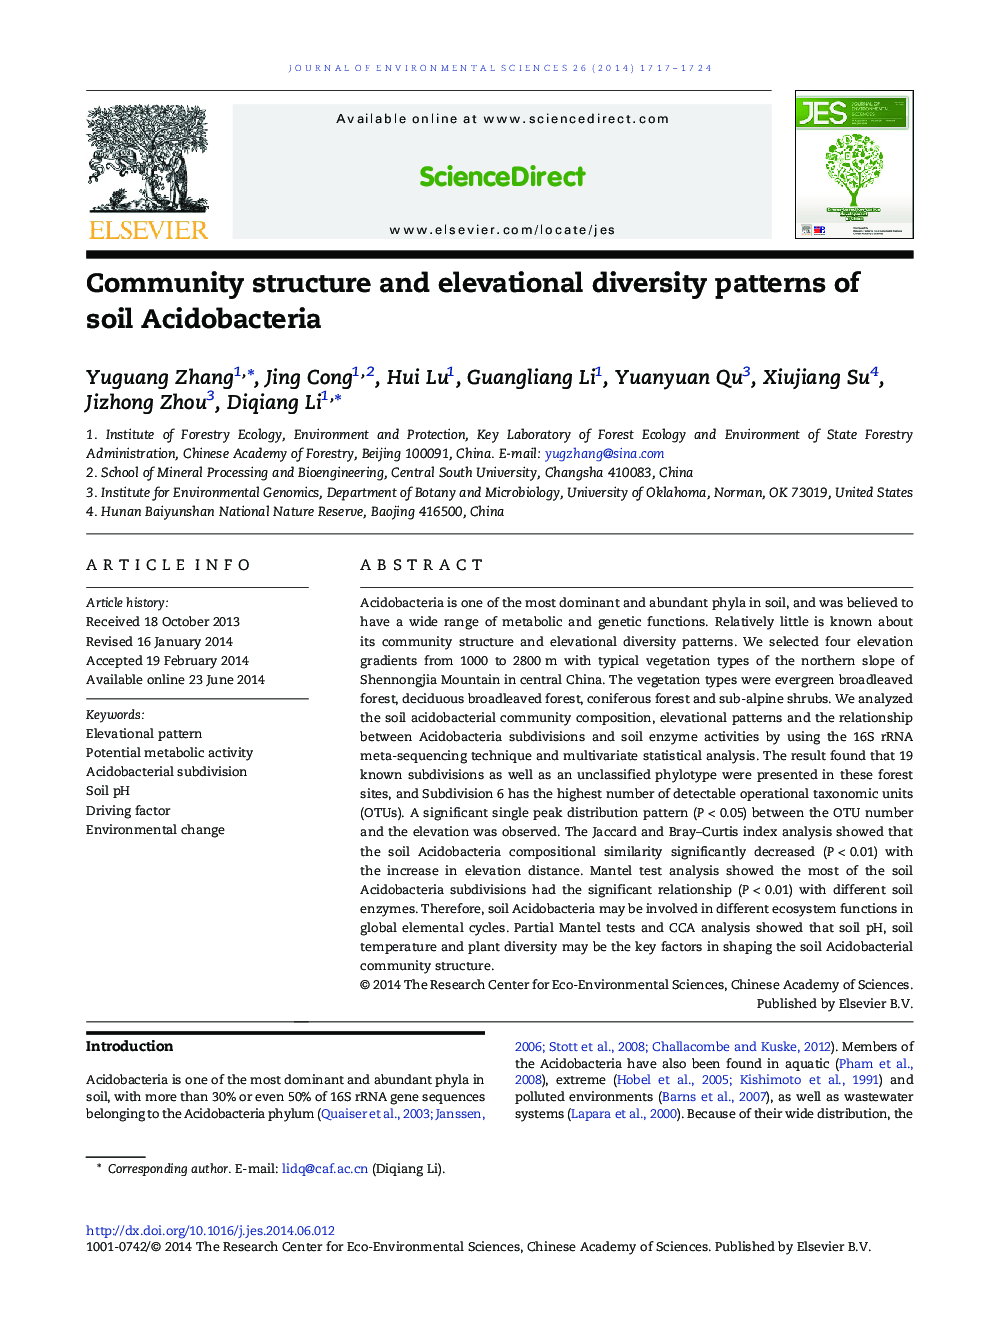 Community structure and elevational diversity patterns of soil Acidobacteria